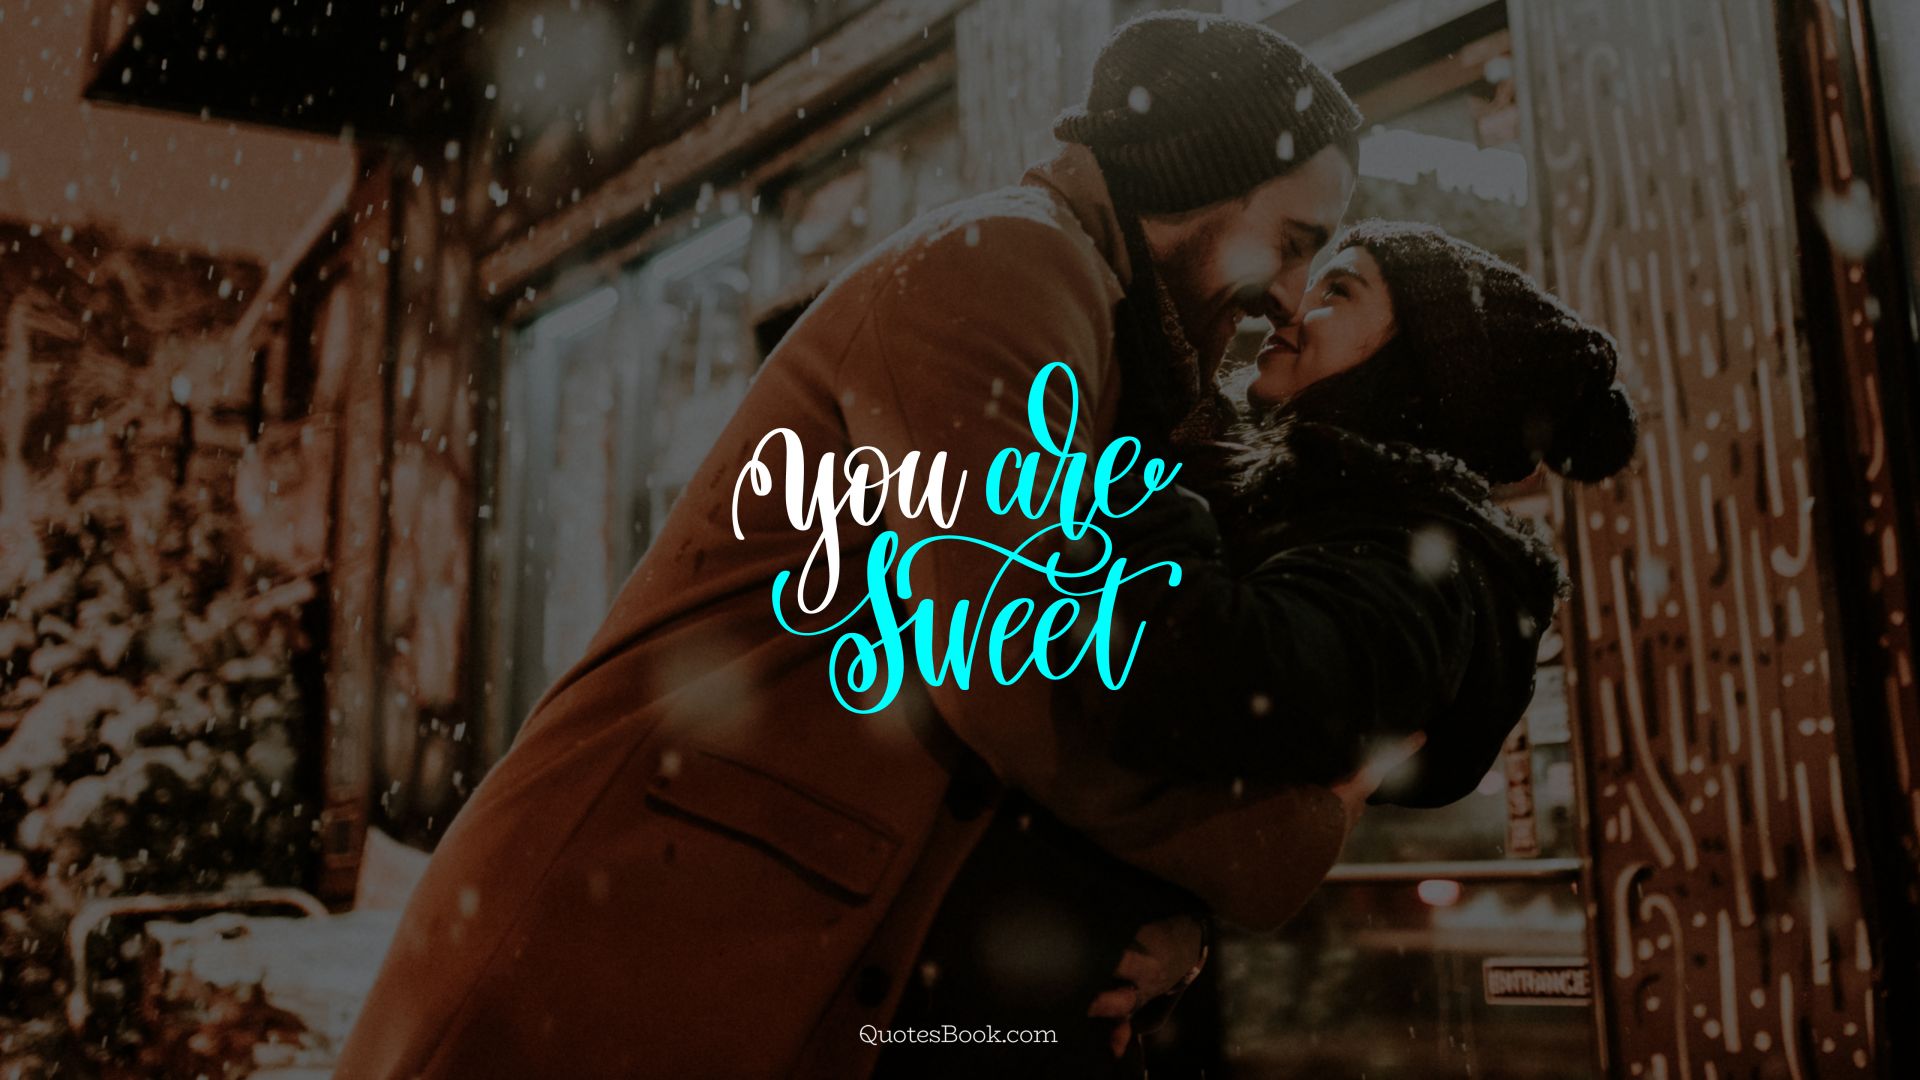 You are sweet